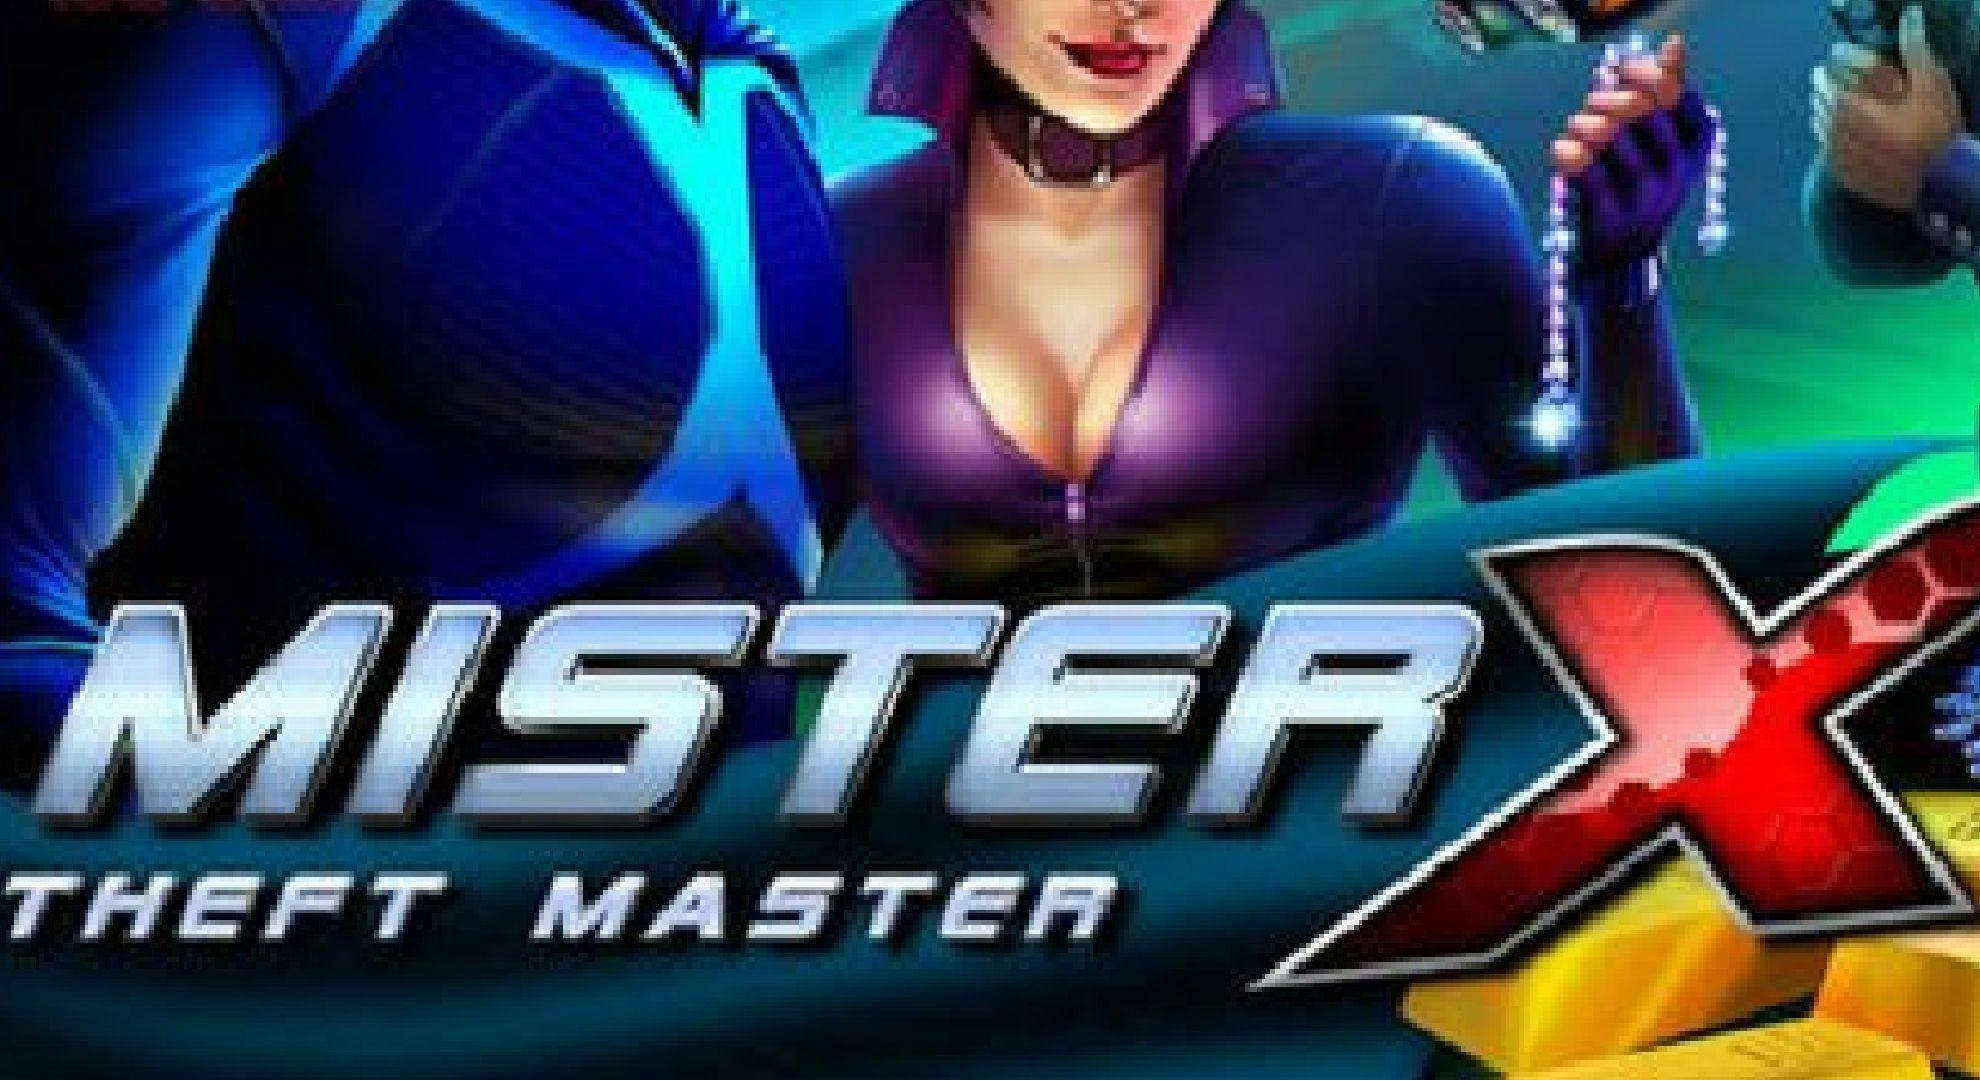 Mister X Theft Master Slot Online Free Play